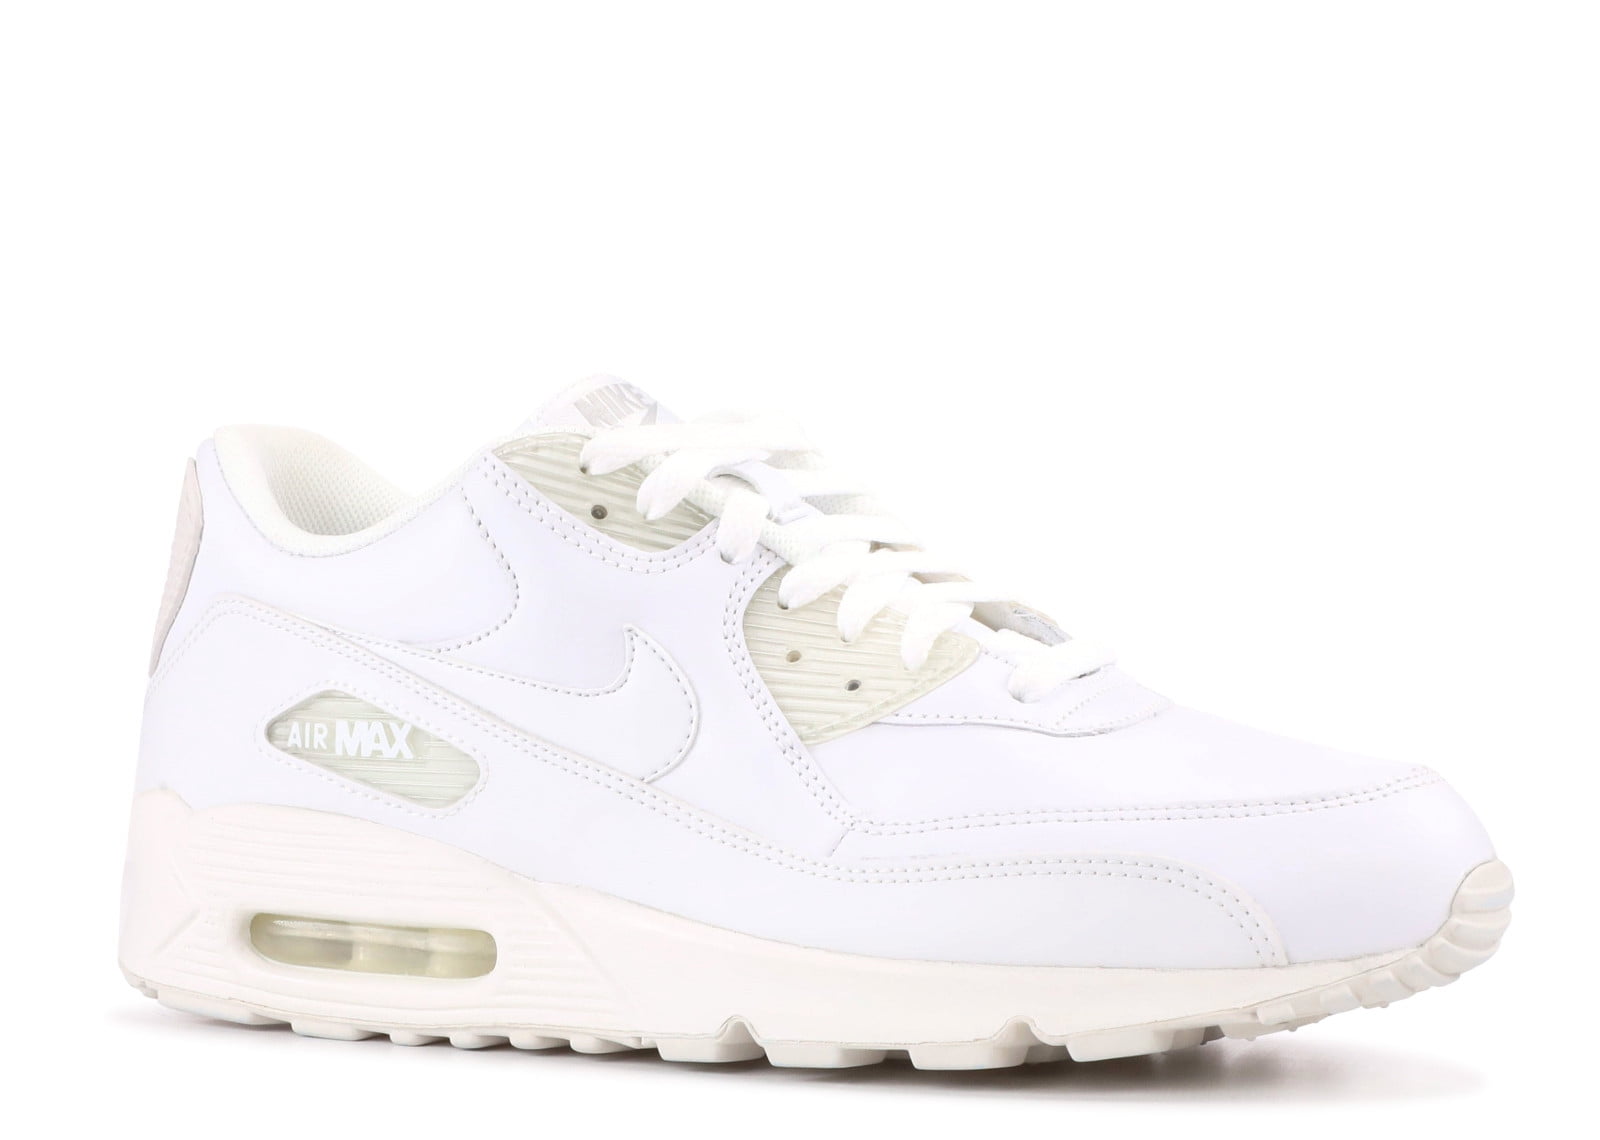 Nike Air Max 90 Leather White/White Men's Running Shoes 302519-113 ...